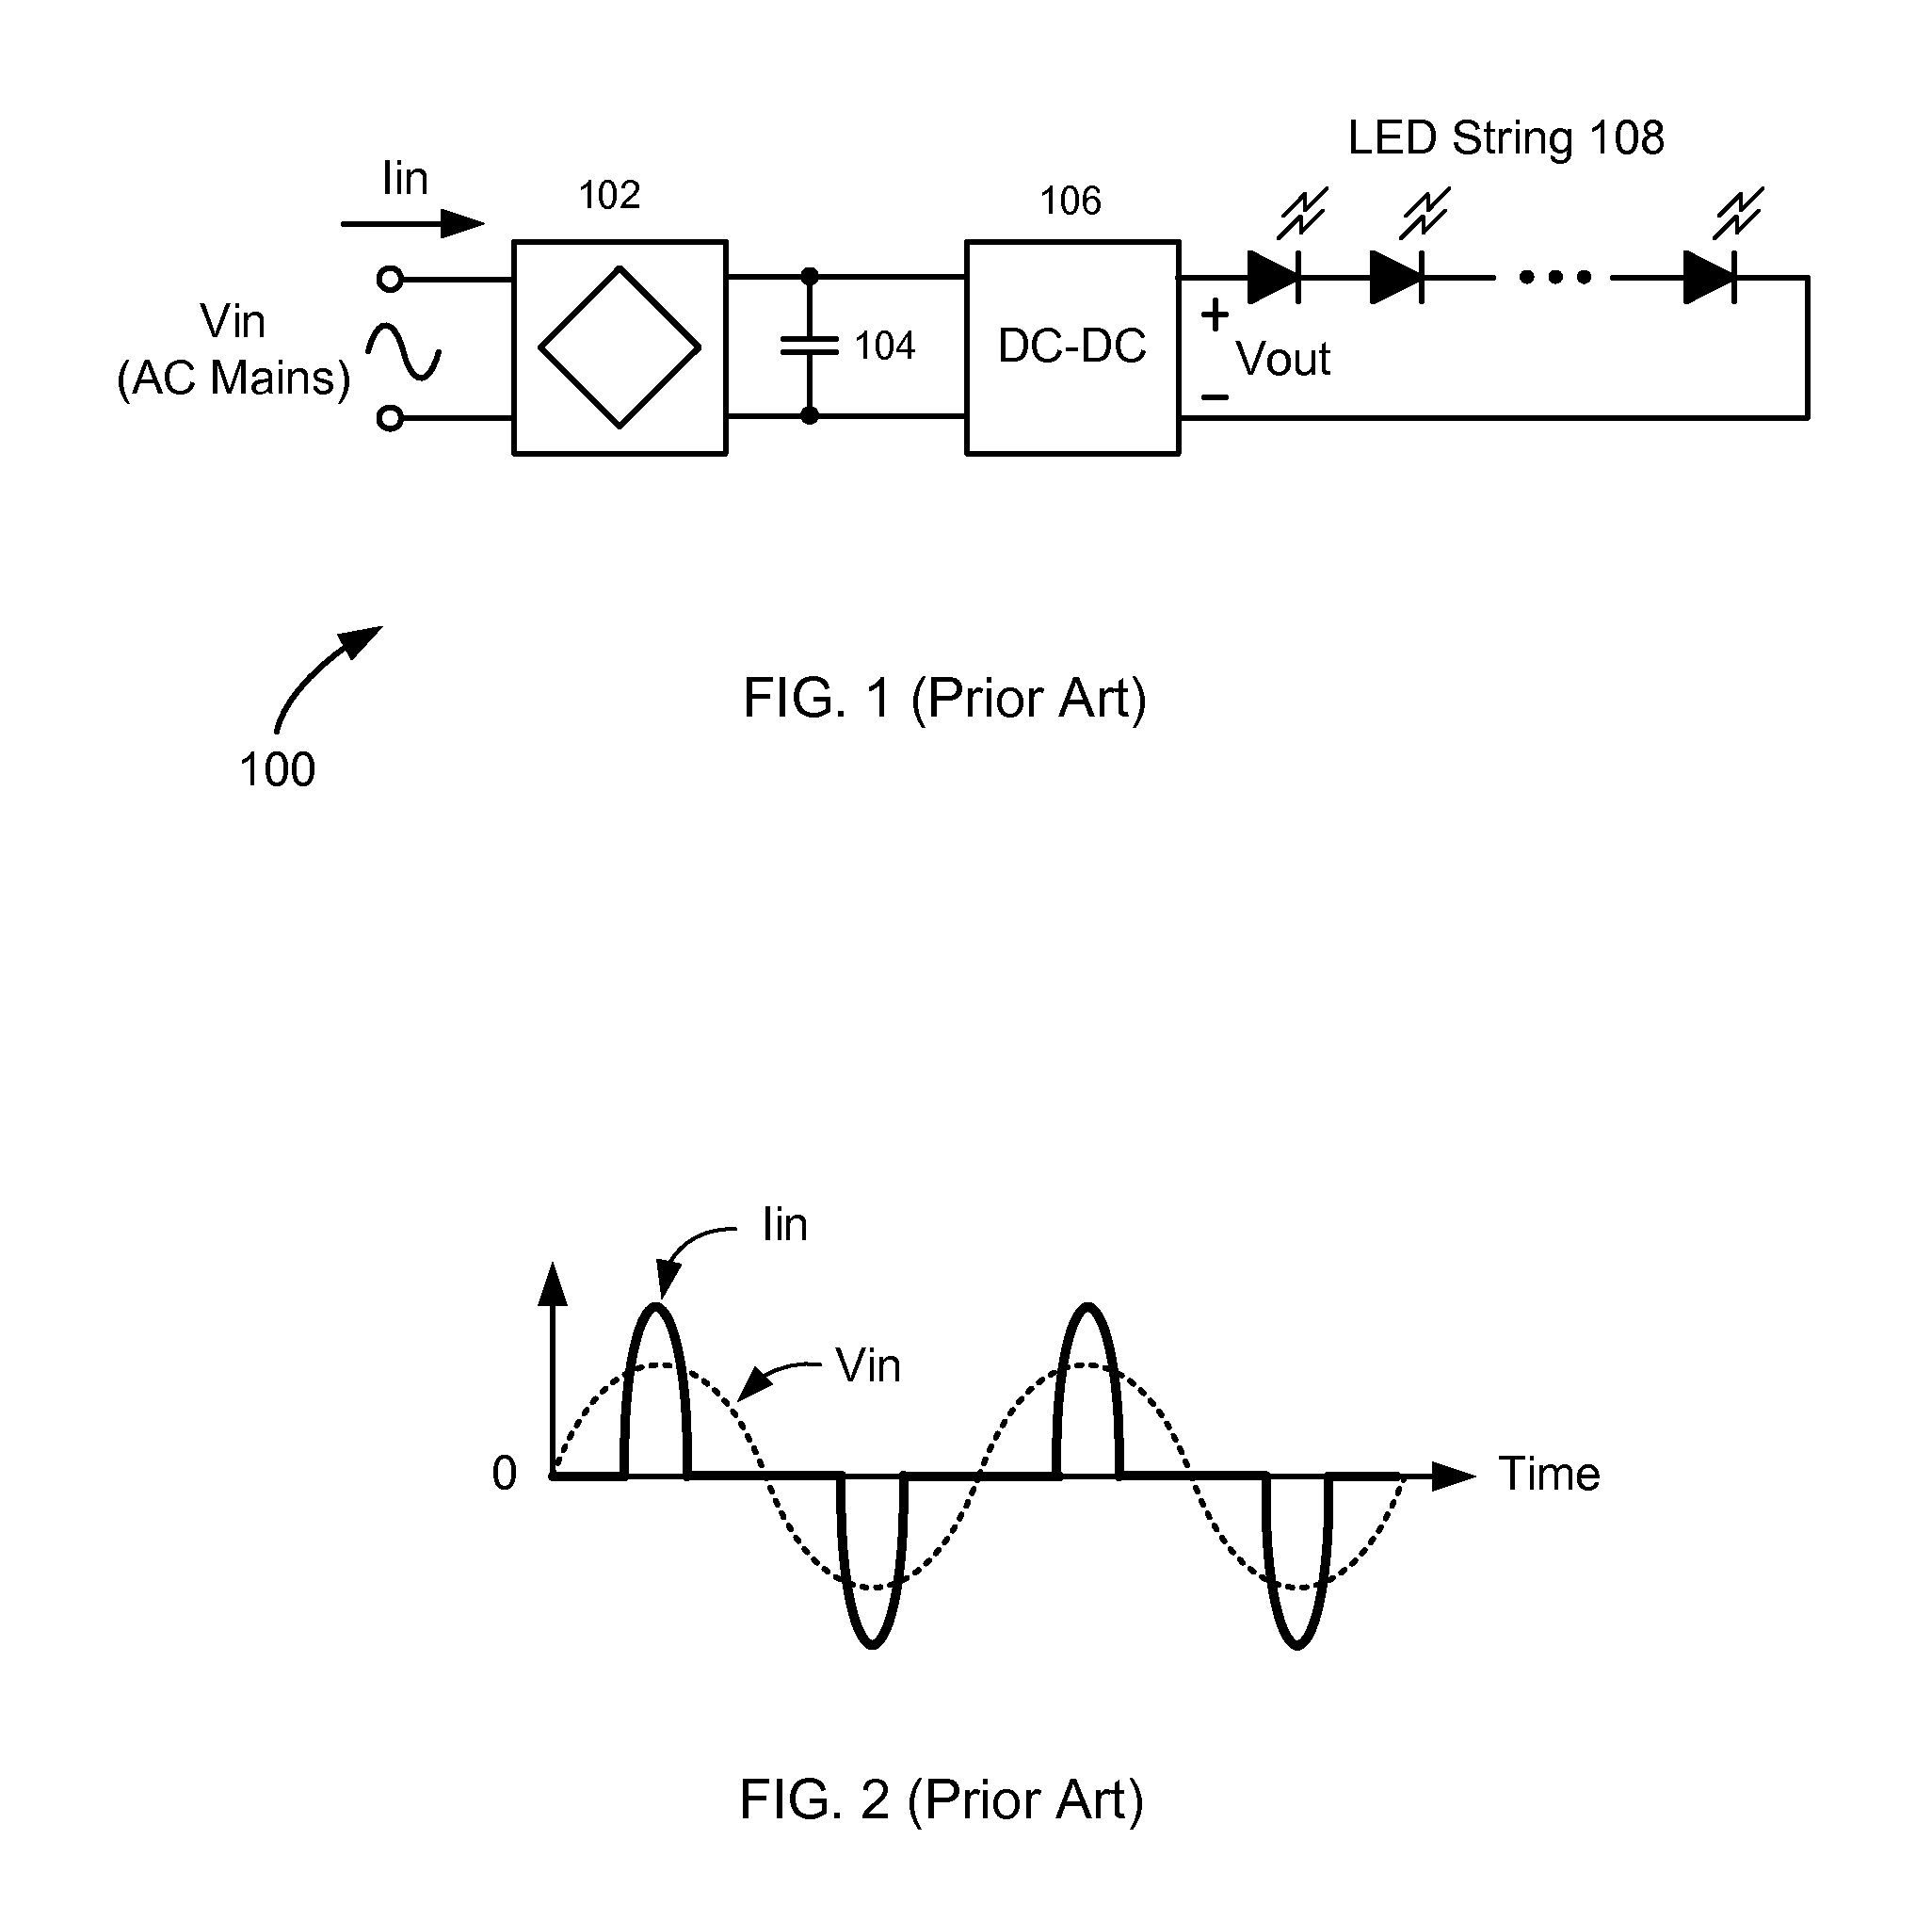 Power Conversion and Control Systems and Methods for Solid-State Lighting